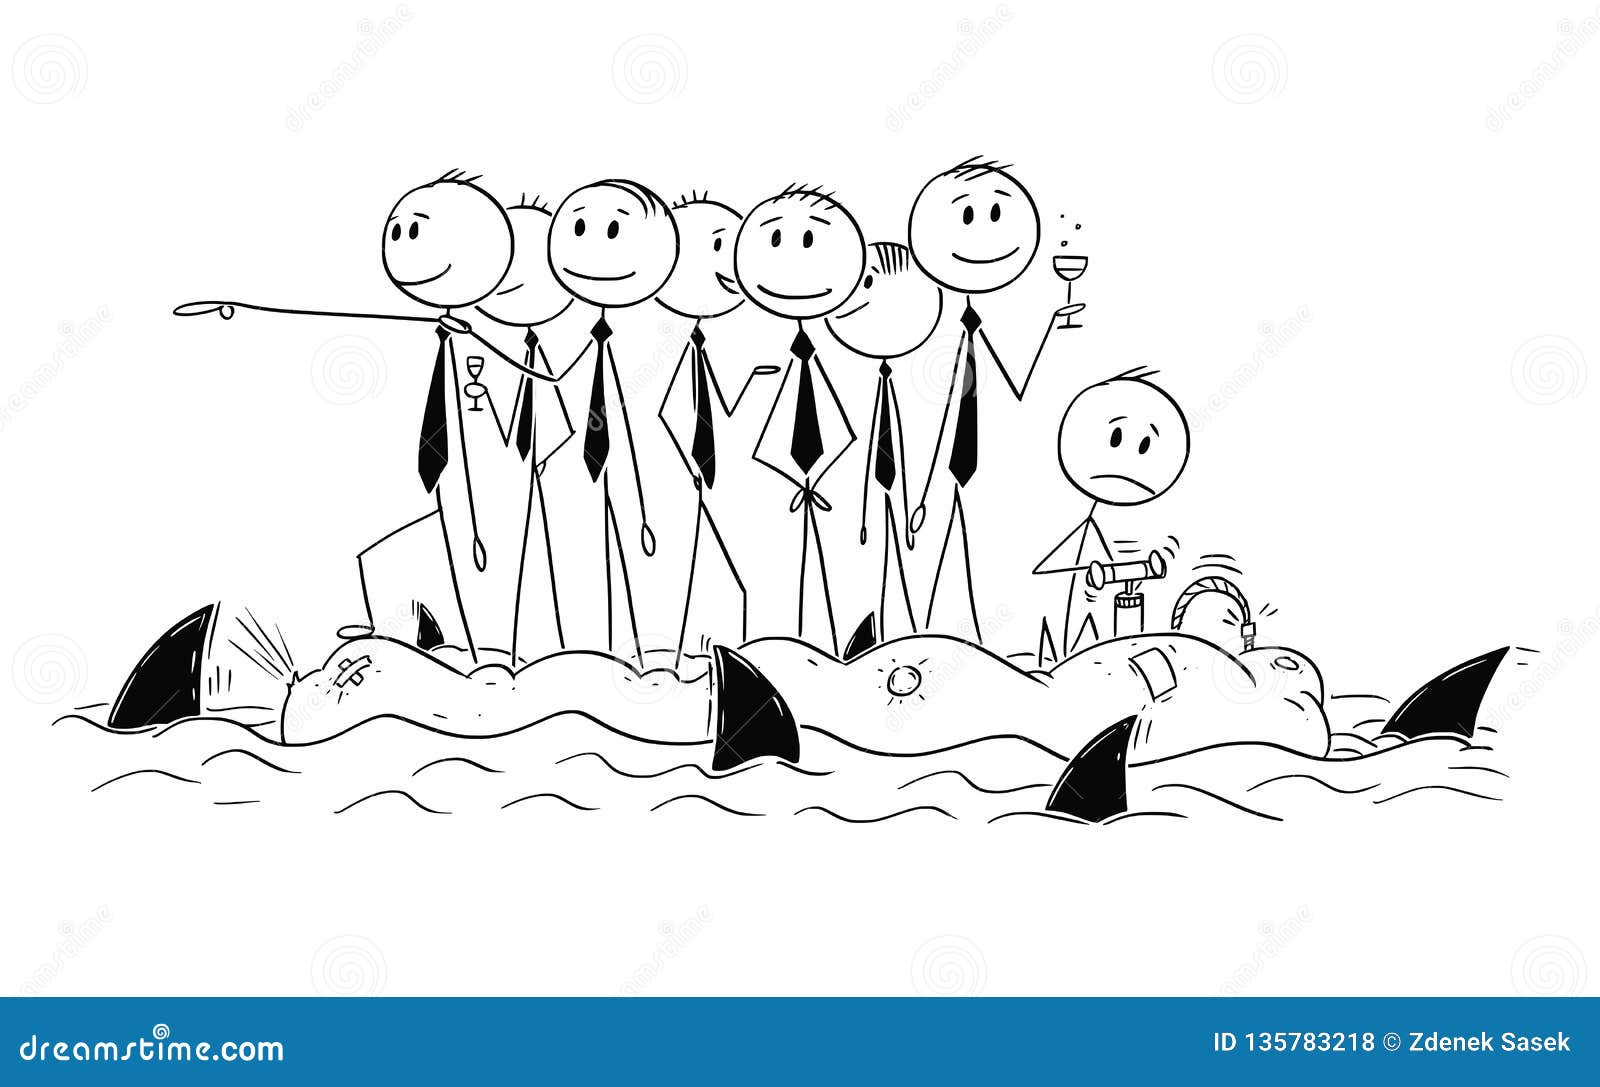 cartoon of group of unworried businessmen or politicians on unstable boat with sharks around